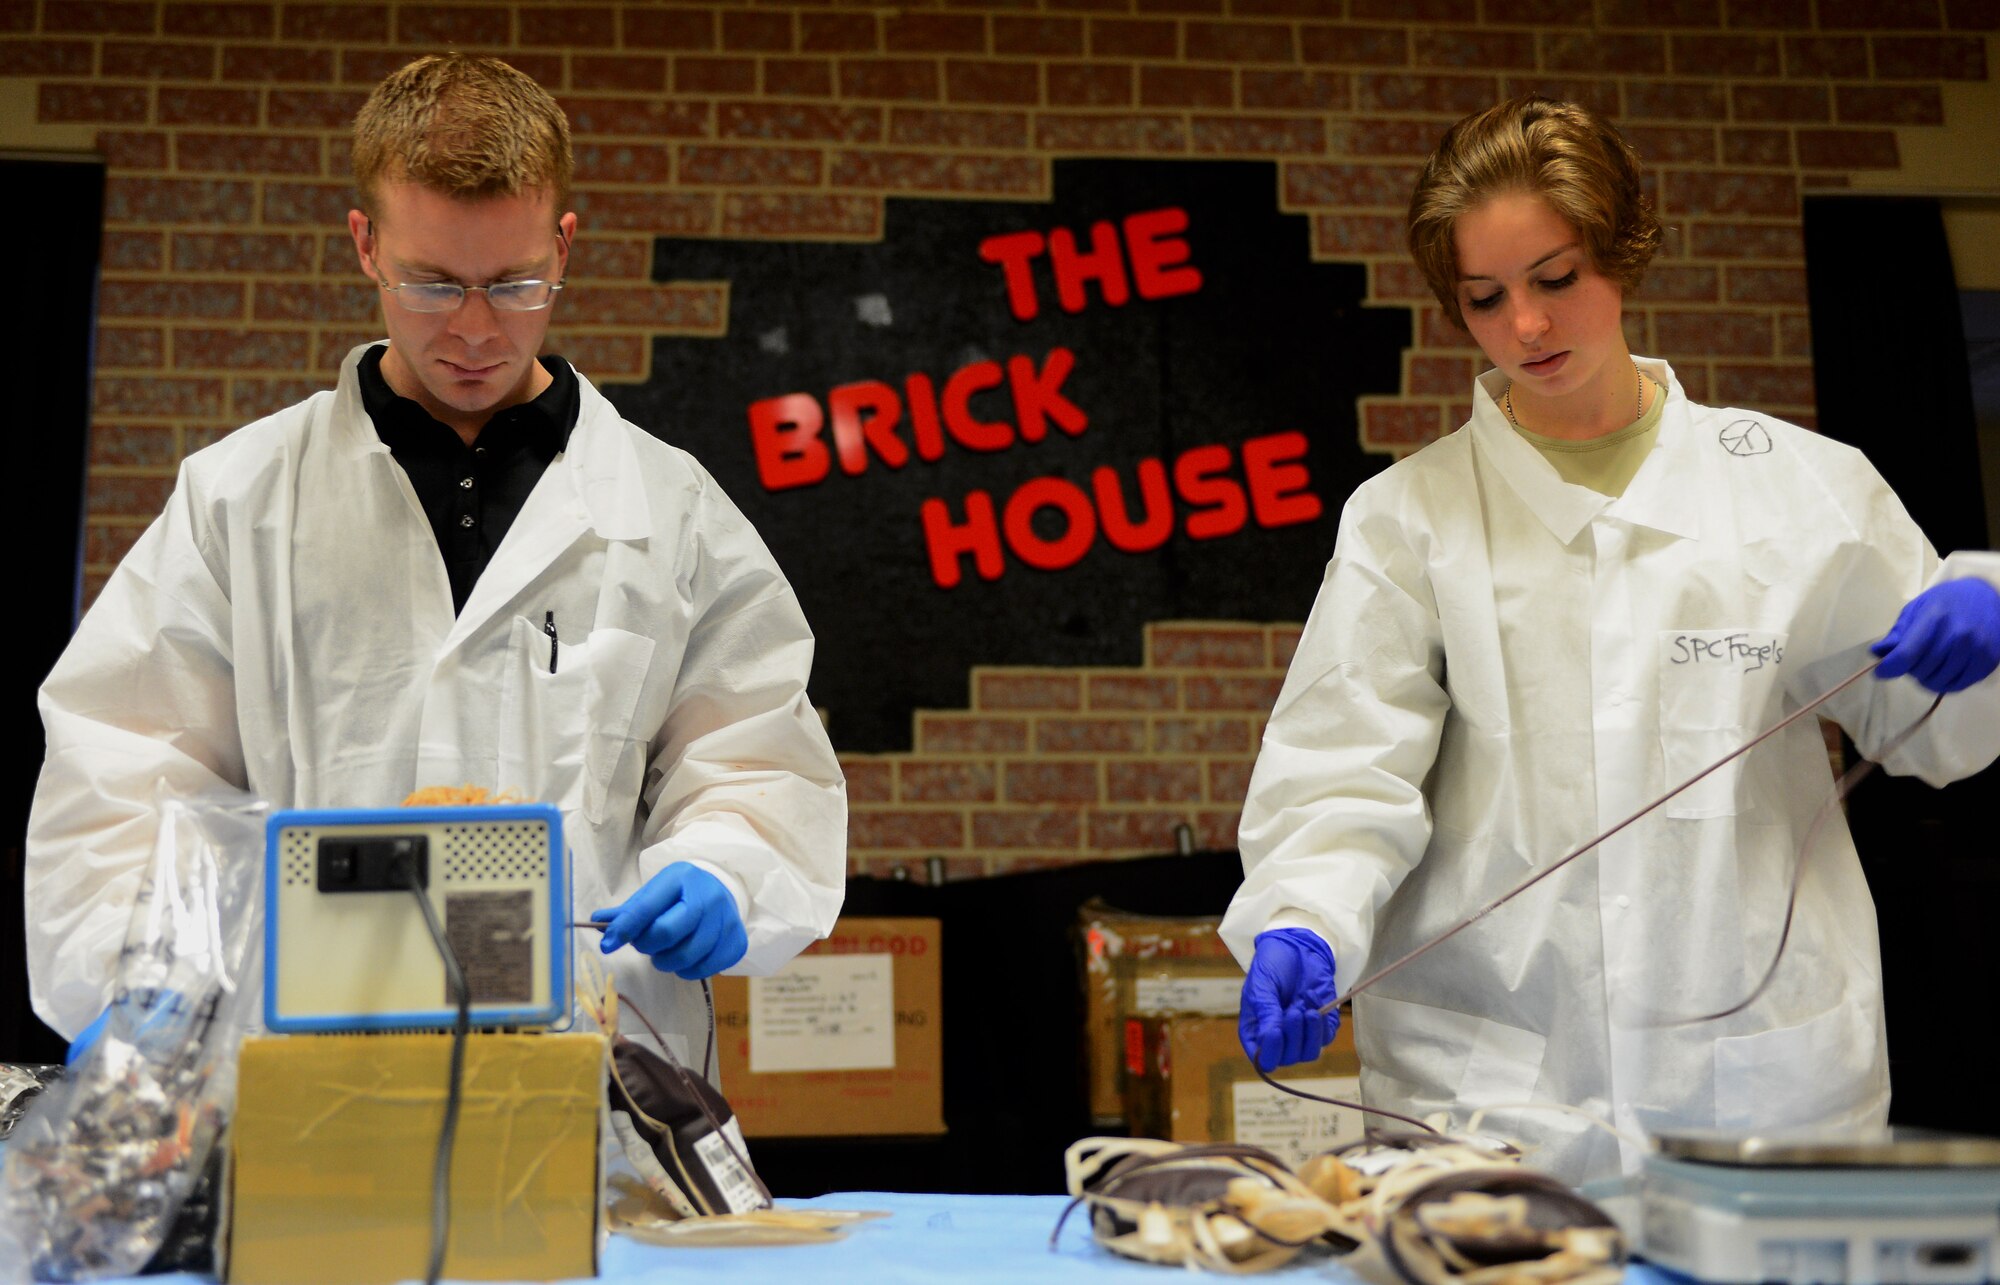 Two Landstuhl Regional Medical Center laboratory technicians prepare bags of blood to be transported during the Armed Services Blood Program blood drive at the Brick House in the community center at Spangdahlem Air Base, Germany, Jan. 20, 2015. The ASBP was established more than 60 years ago as a joint field operating agency. (U.S. Air Force photo by Airman 1st Class Luke Kitterman/Released)
